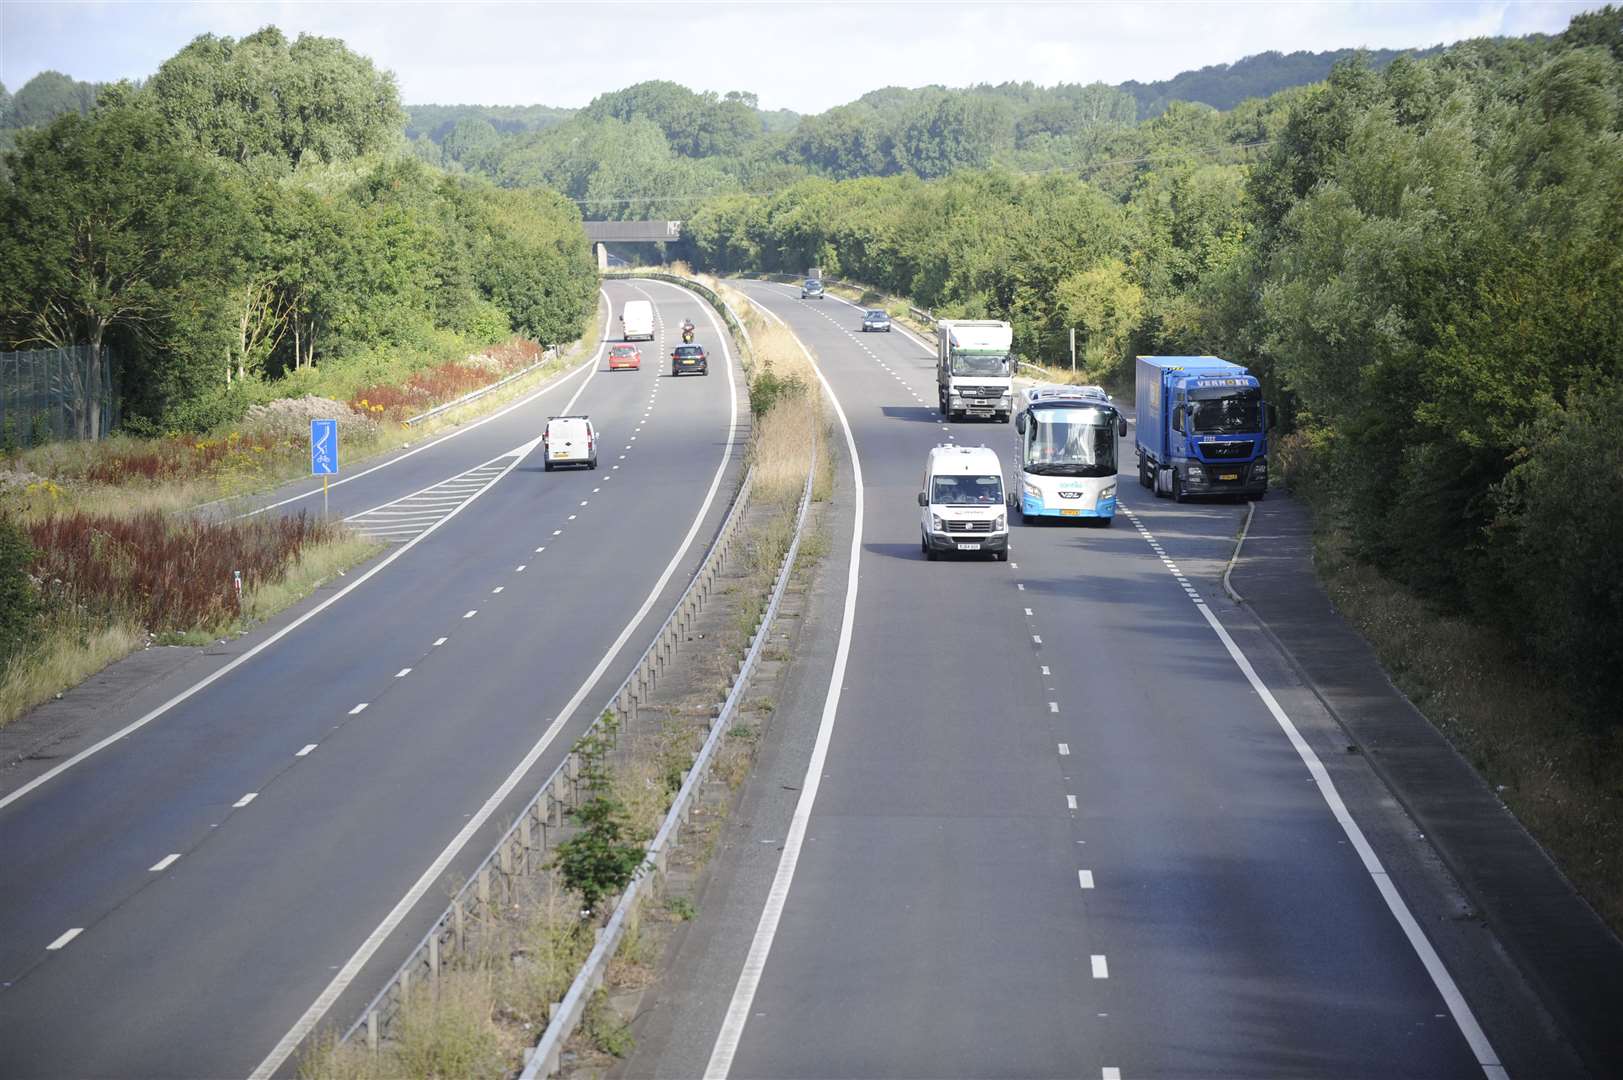 Work on the A2 will be carried out in phases